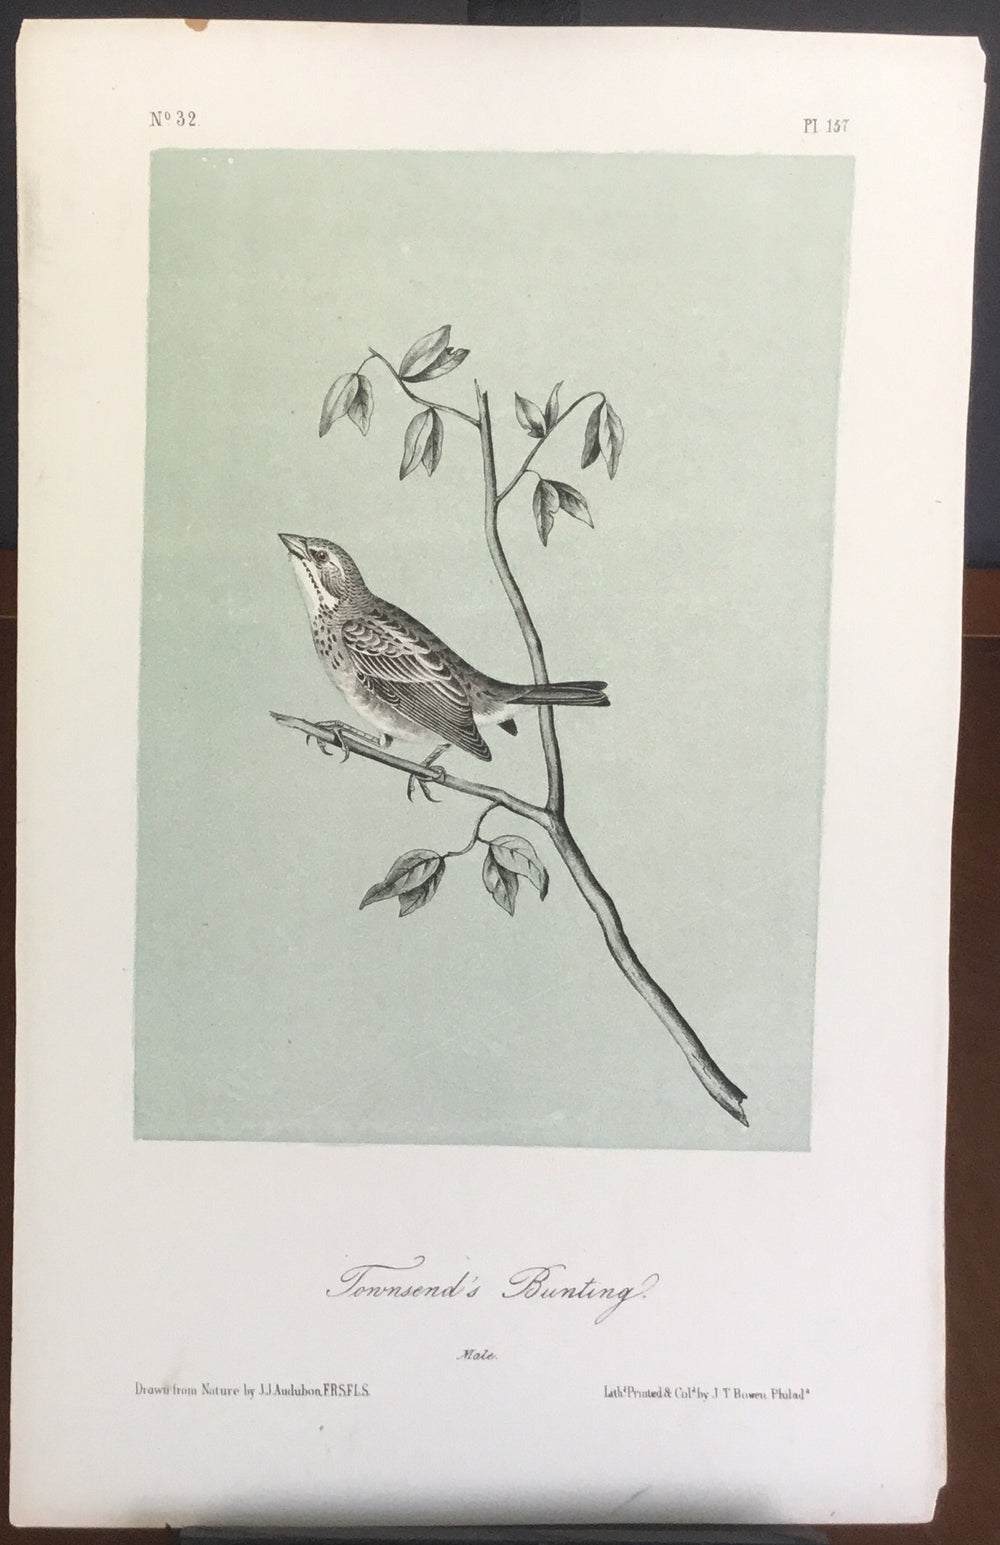 Audubon Octavo Townsend’s Bunting, plate 154, uncolored test sheet, 7 x 11